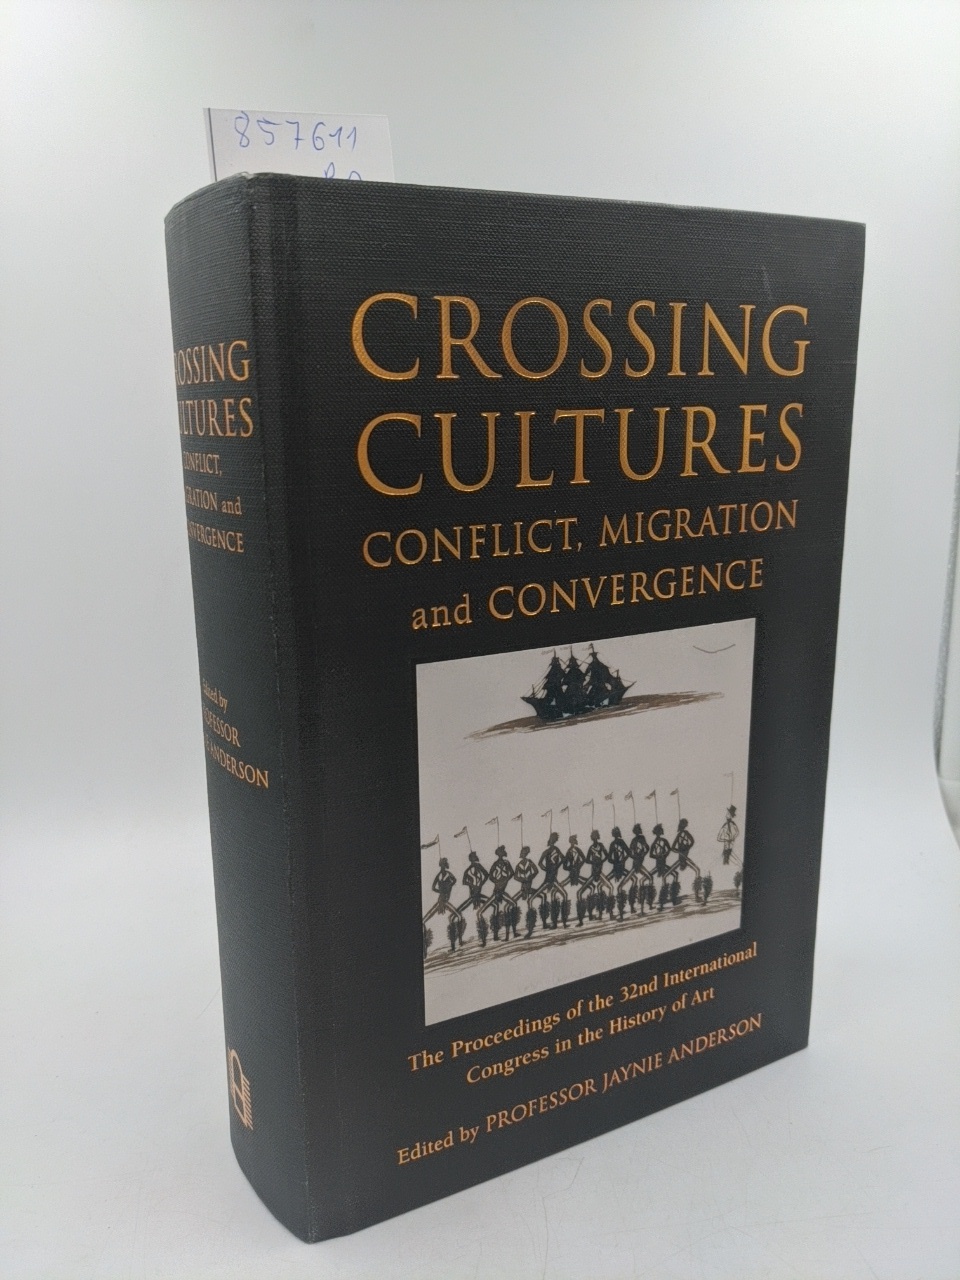 Anderson, Jaynie (Ed.):  Crossing Cultures: Conflict, Migration and Convergence - The Proceedings of the 32nd International Congress of the History of Art. 